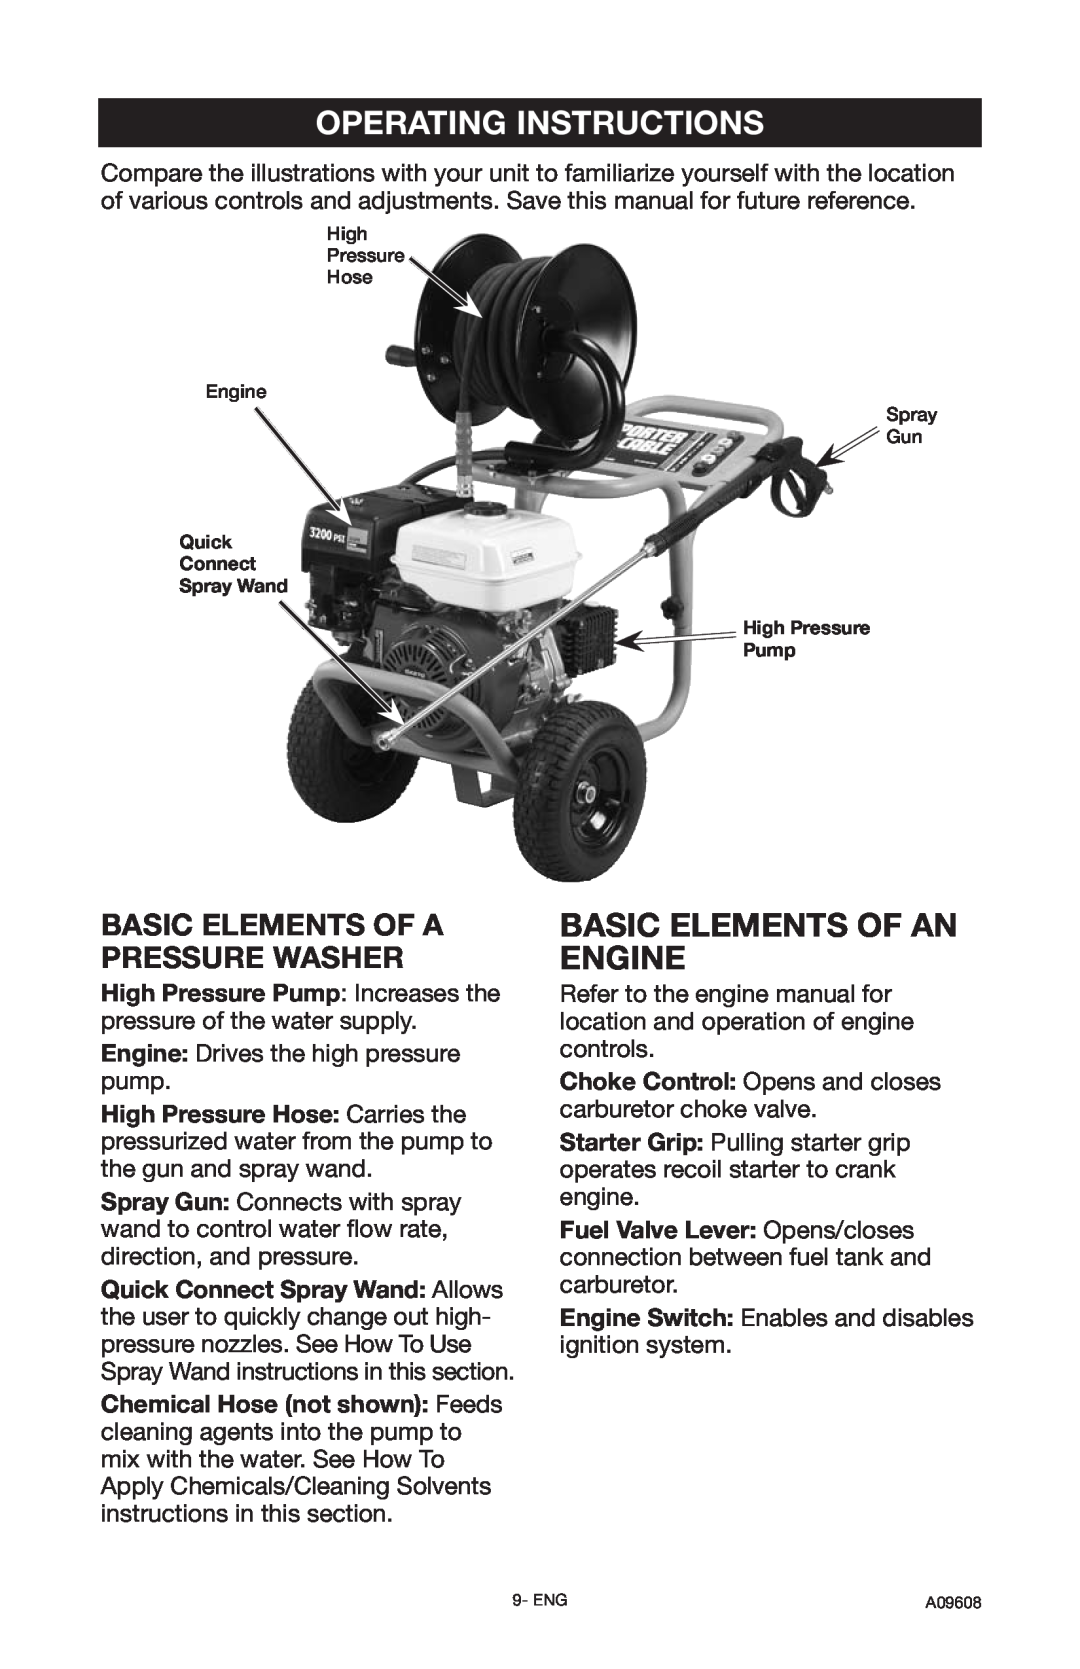 Porter-Cable PCH3200 Operating Instructions, Basic Elements Of A Pressure Washer, Basic Elements Of An Engine 